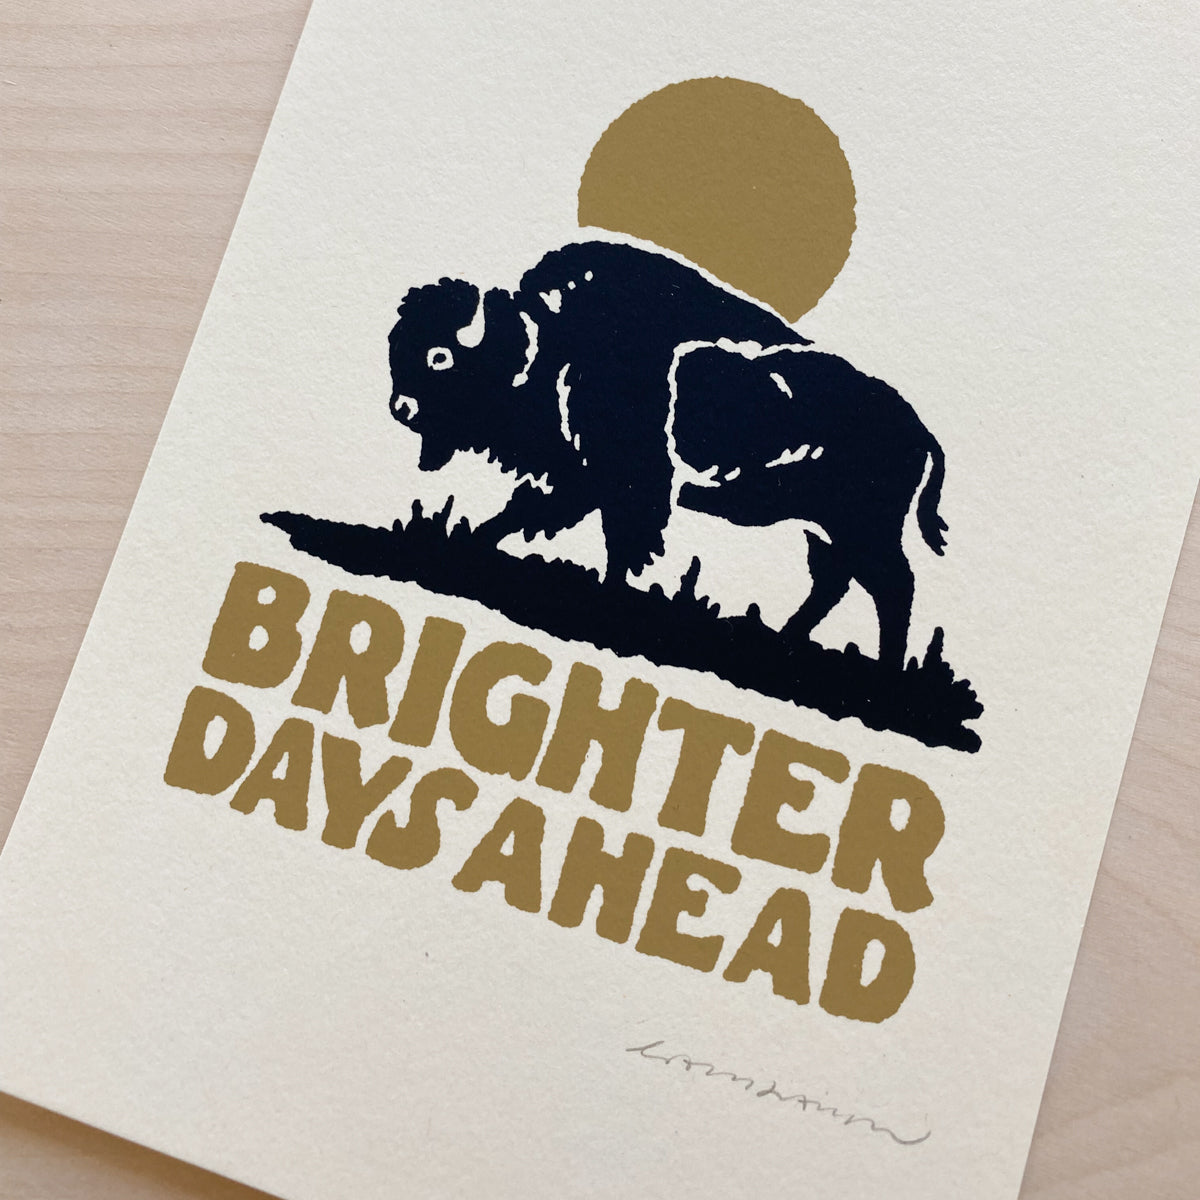 Brighter Days Bison - Signed 5x7in Print #388